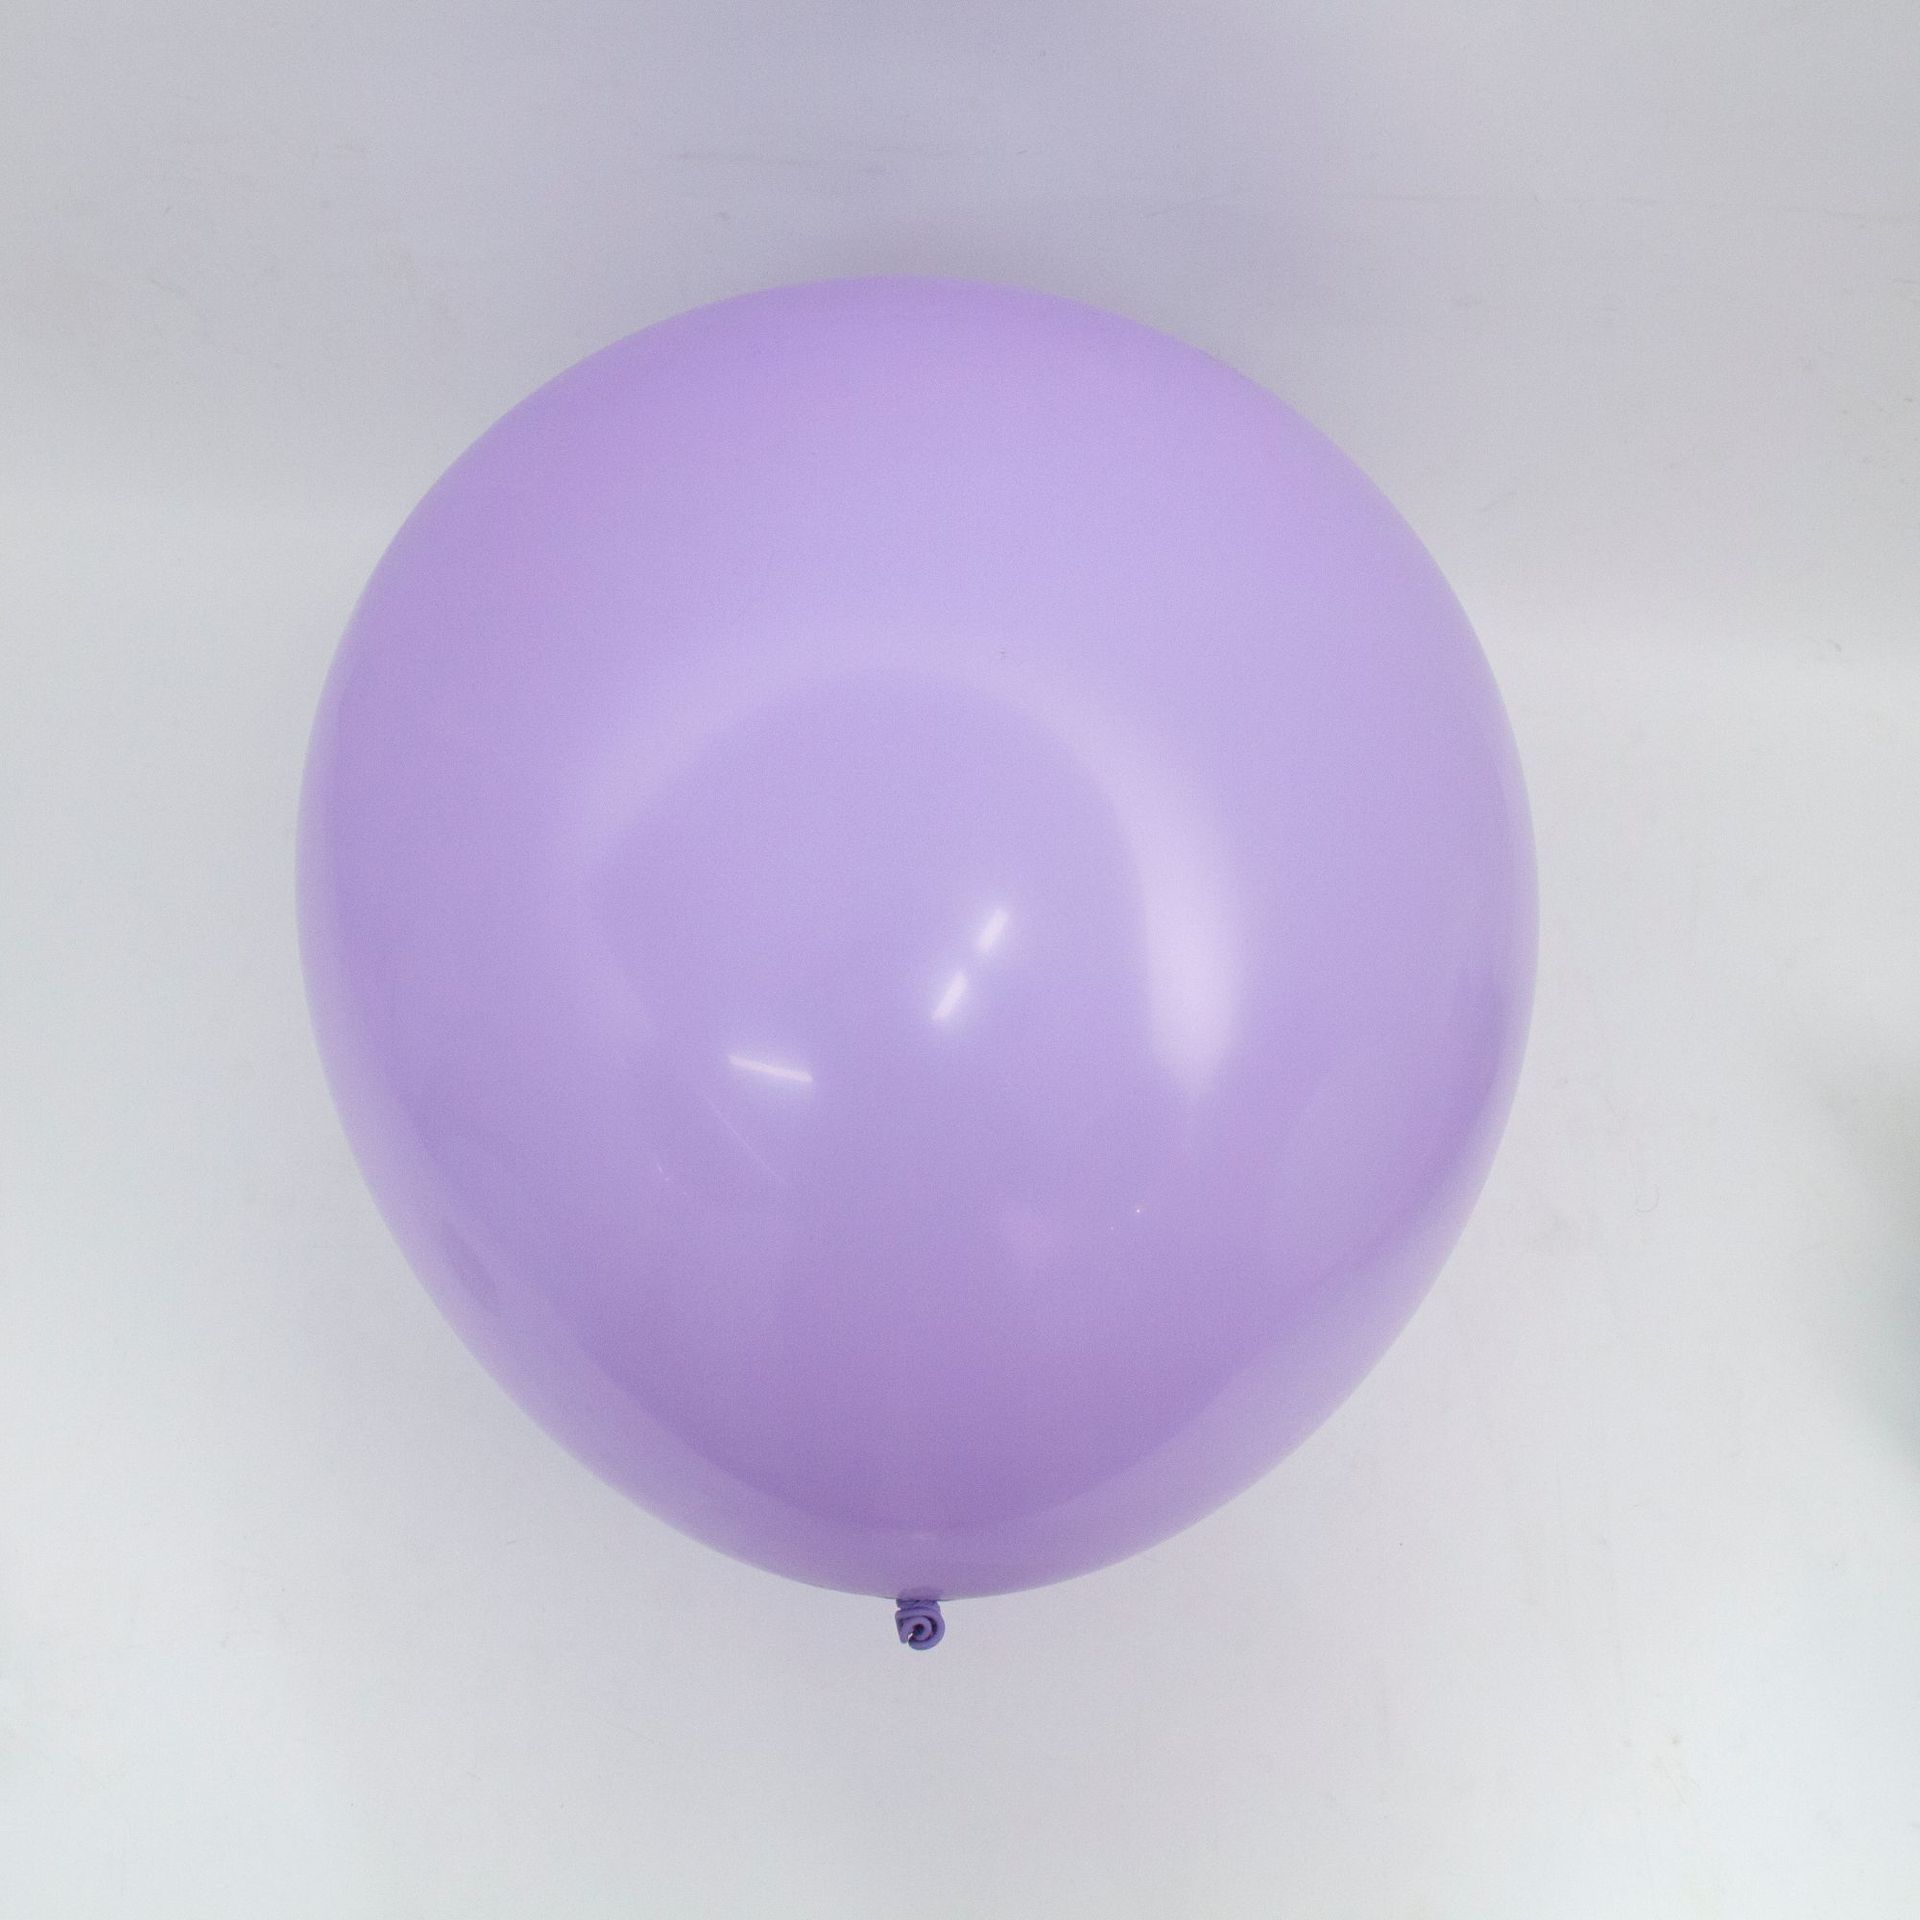 17" Outdoor Display Balloons-Basic Colors